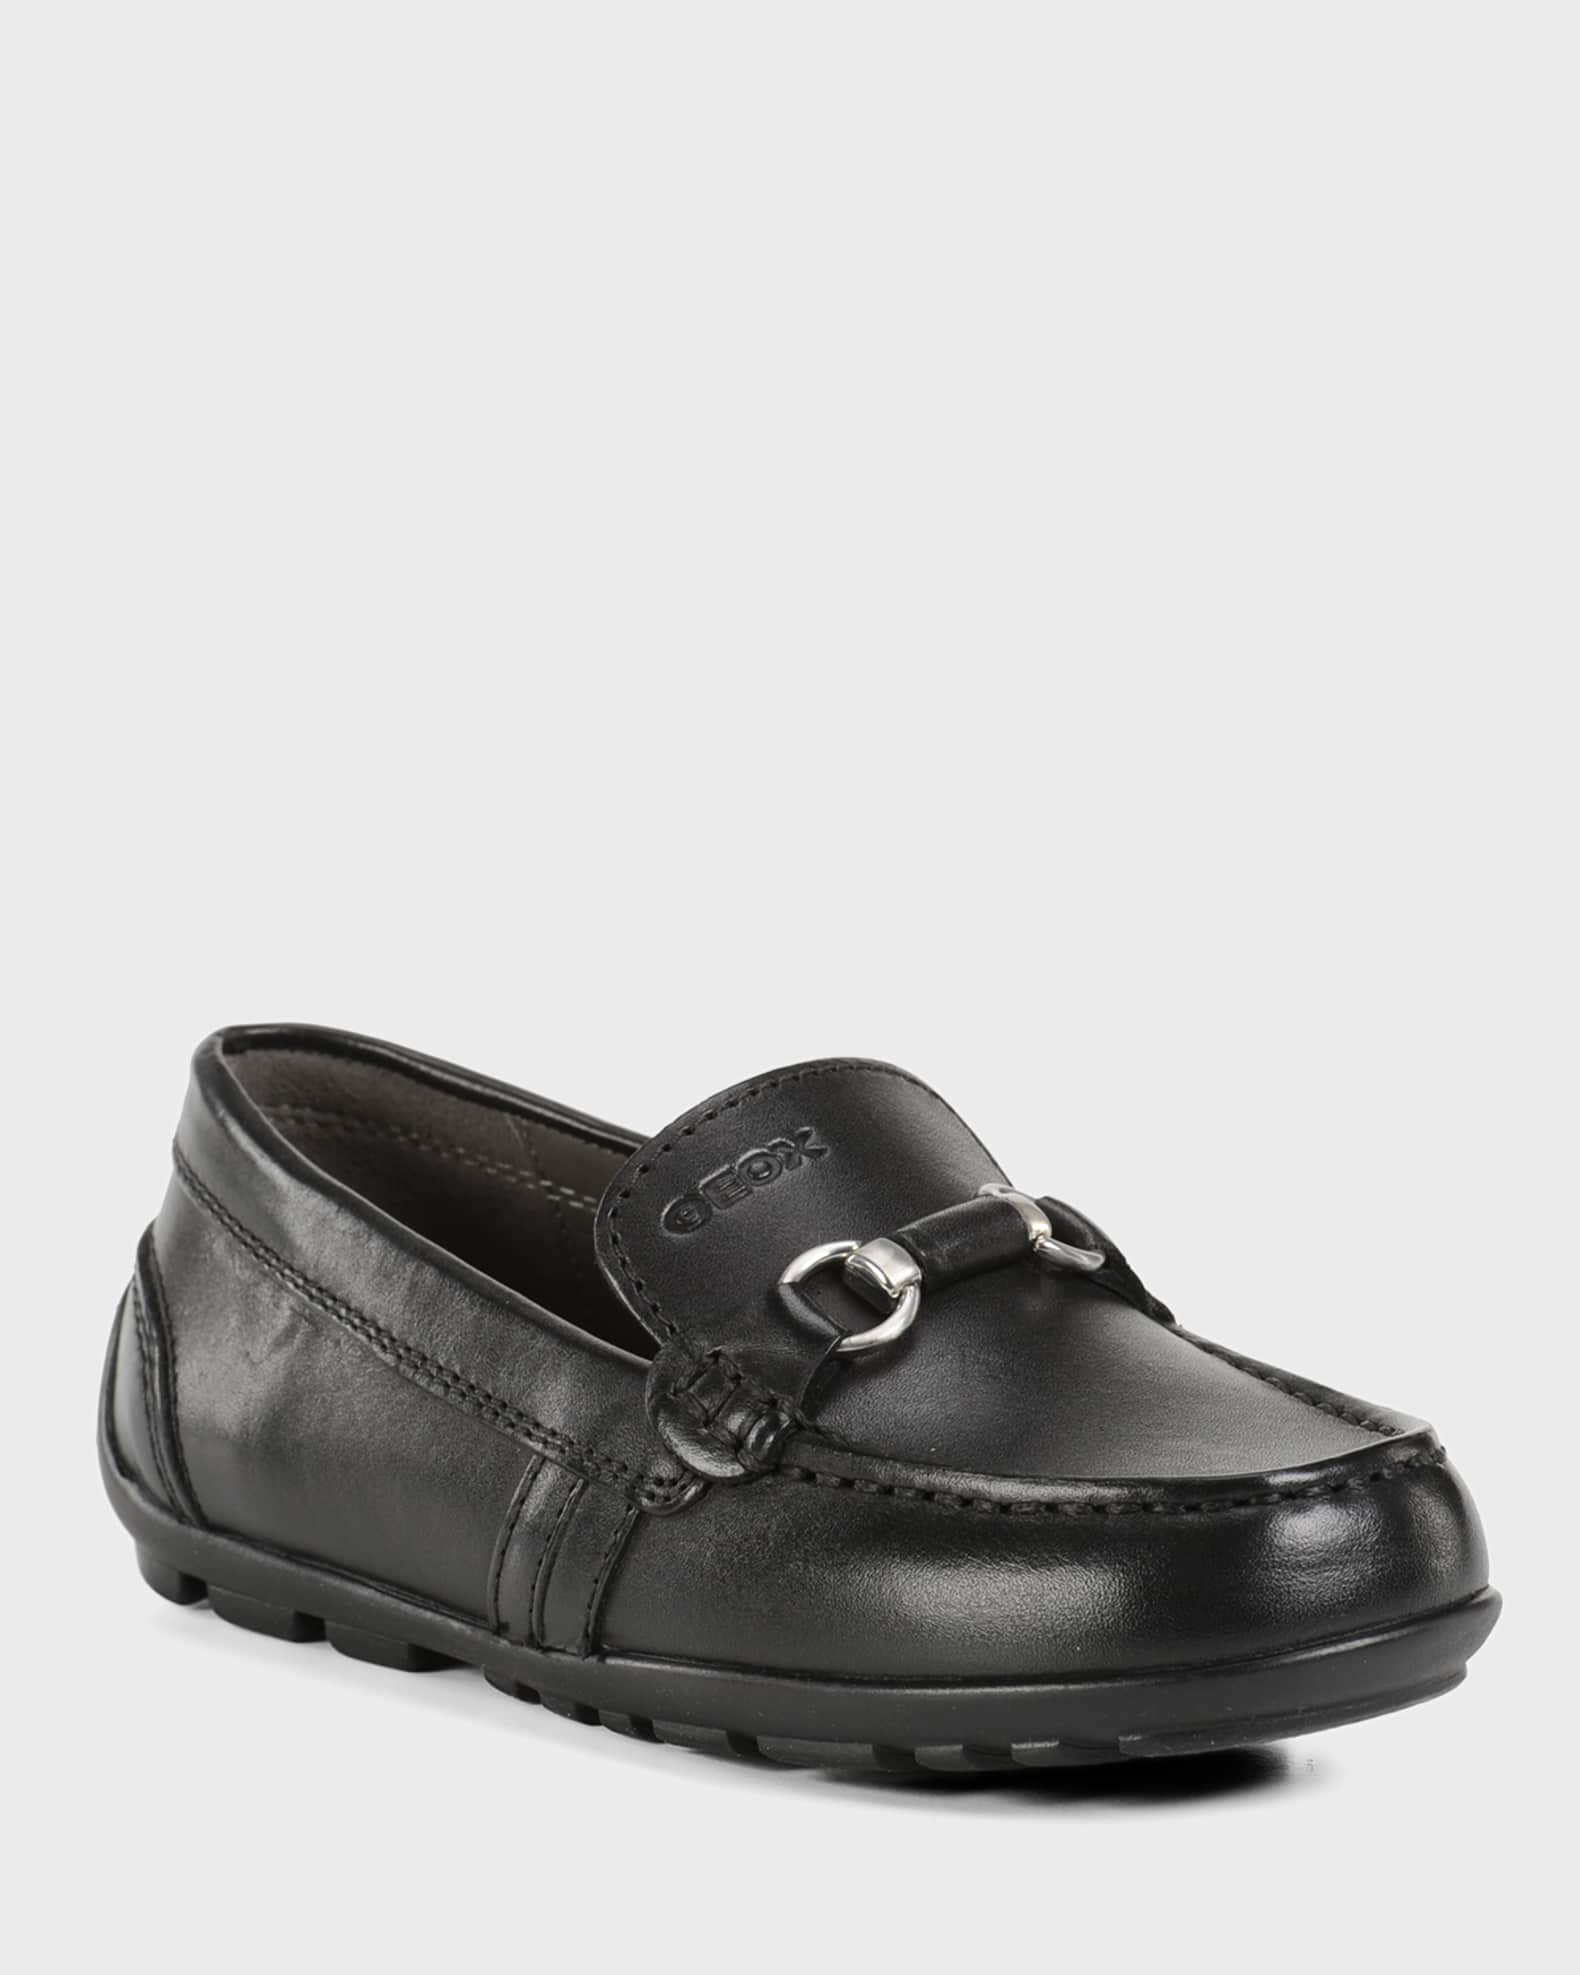 Geox Boy's New Fast Loafers, Toddler/Kids | Neiman Marcus